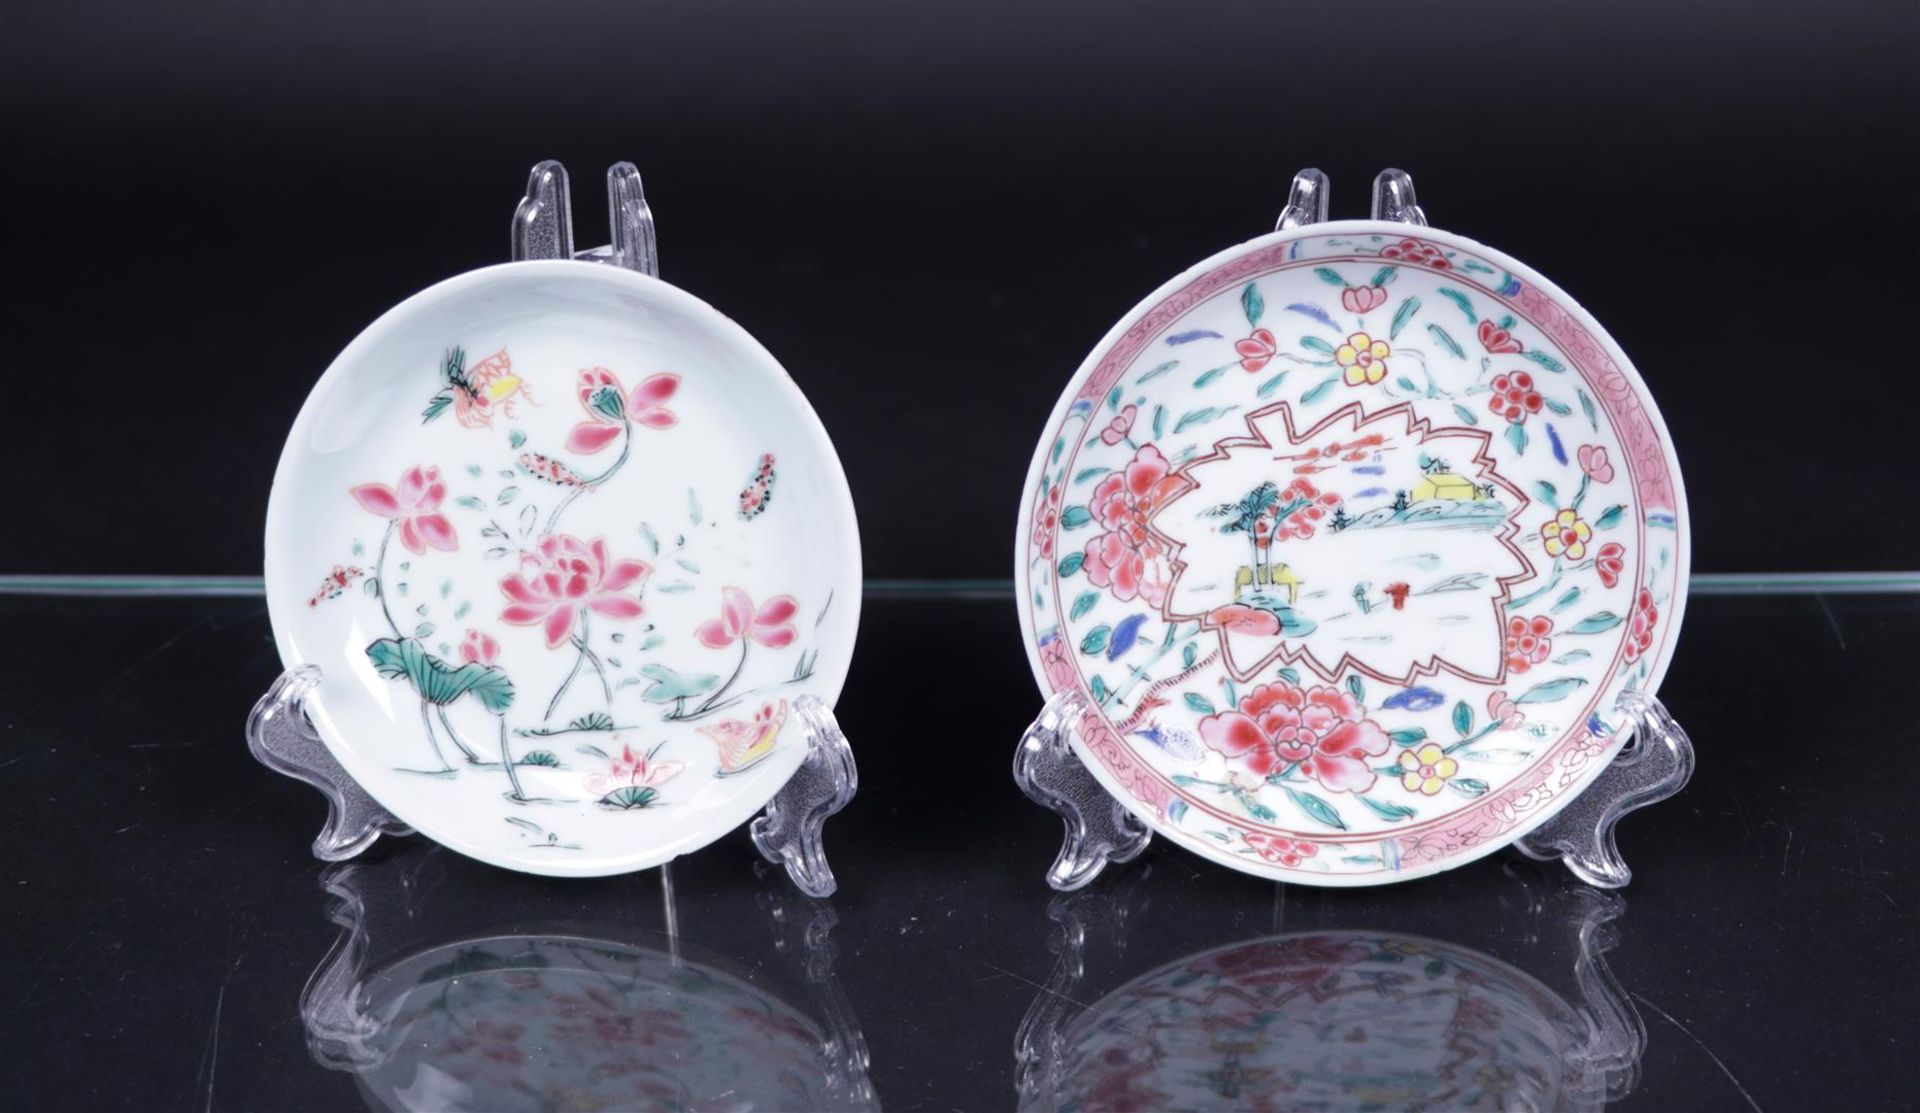 Two porcelain various Famille Rose plates, one with a leaf-shaped bed with a landscape, the other wi